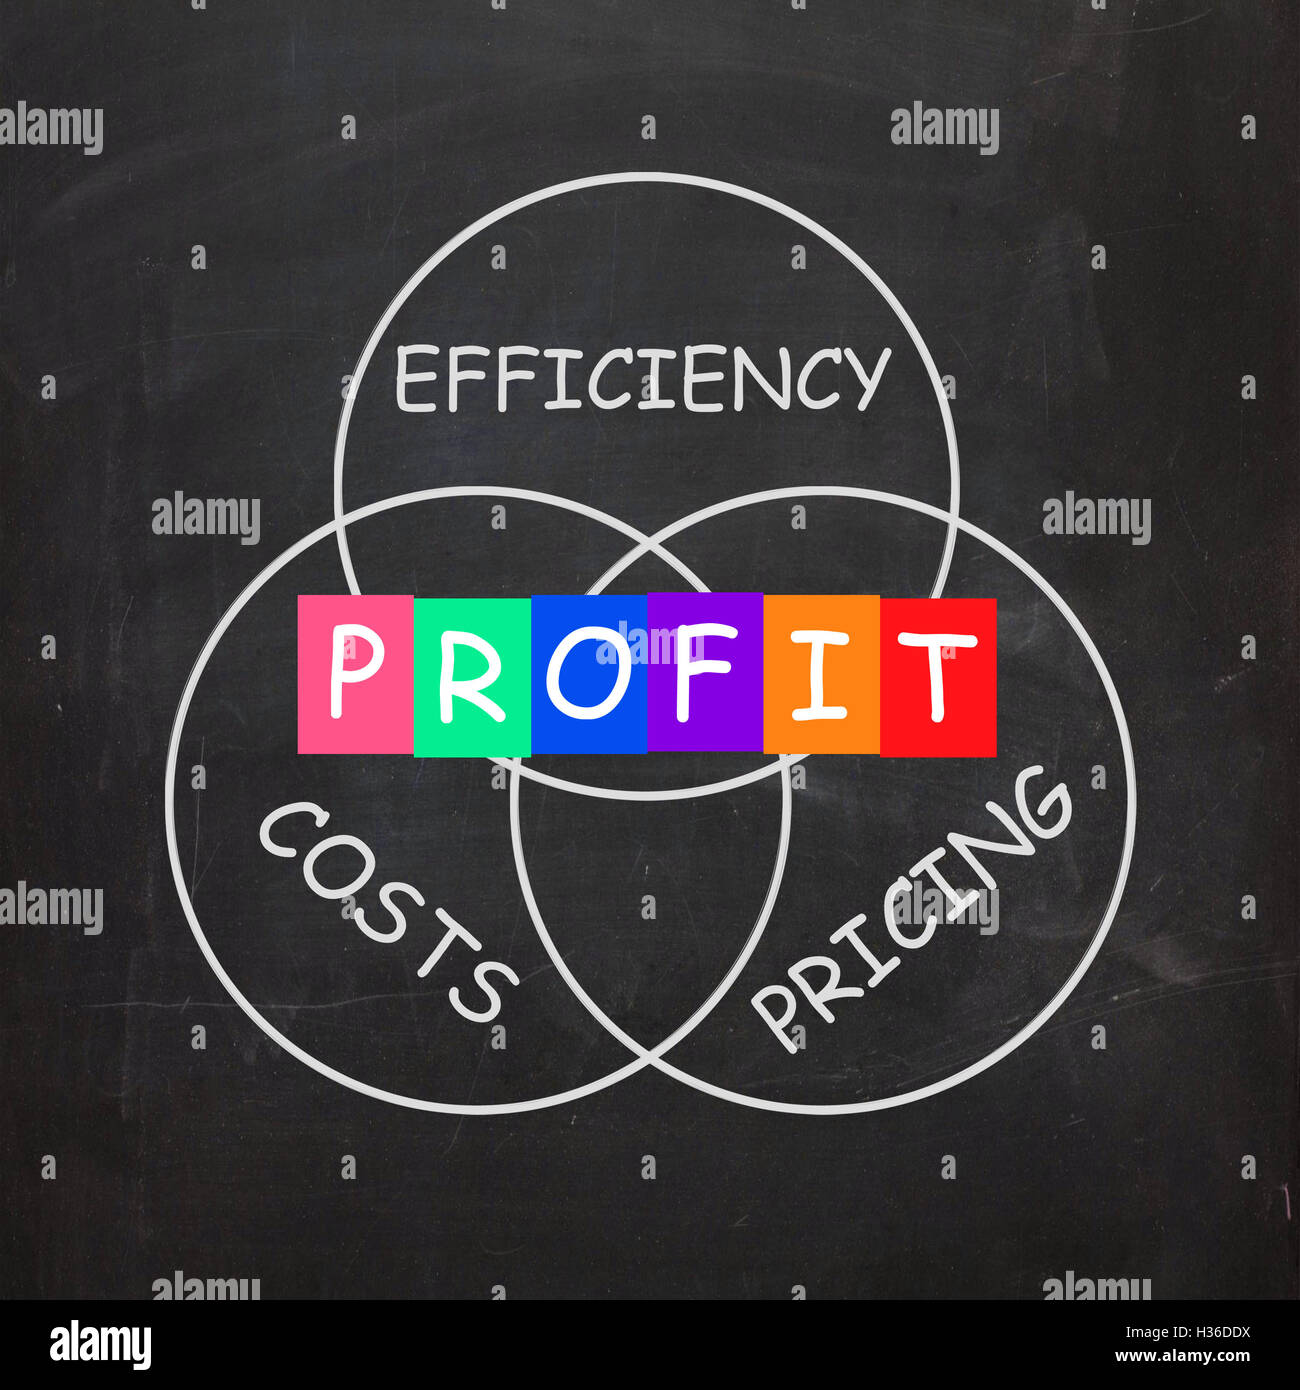 Profit Comes From Efficiency in Costs and Pricing Stock Photo